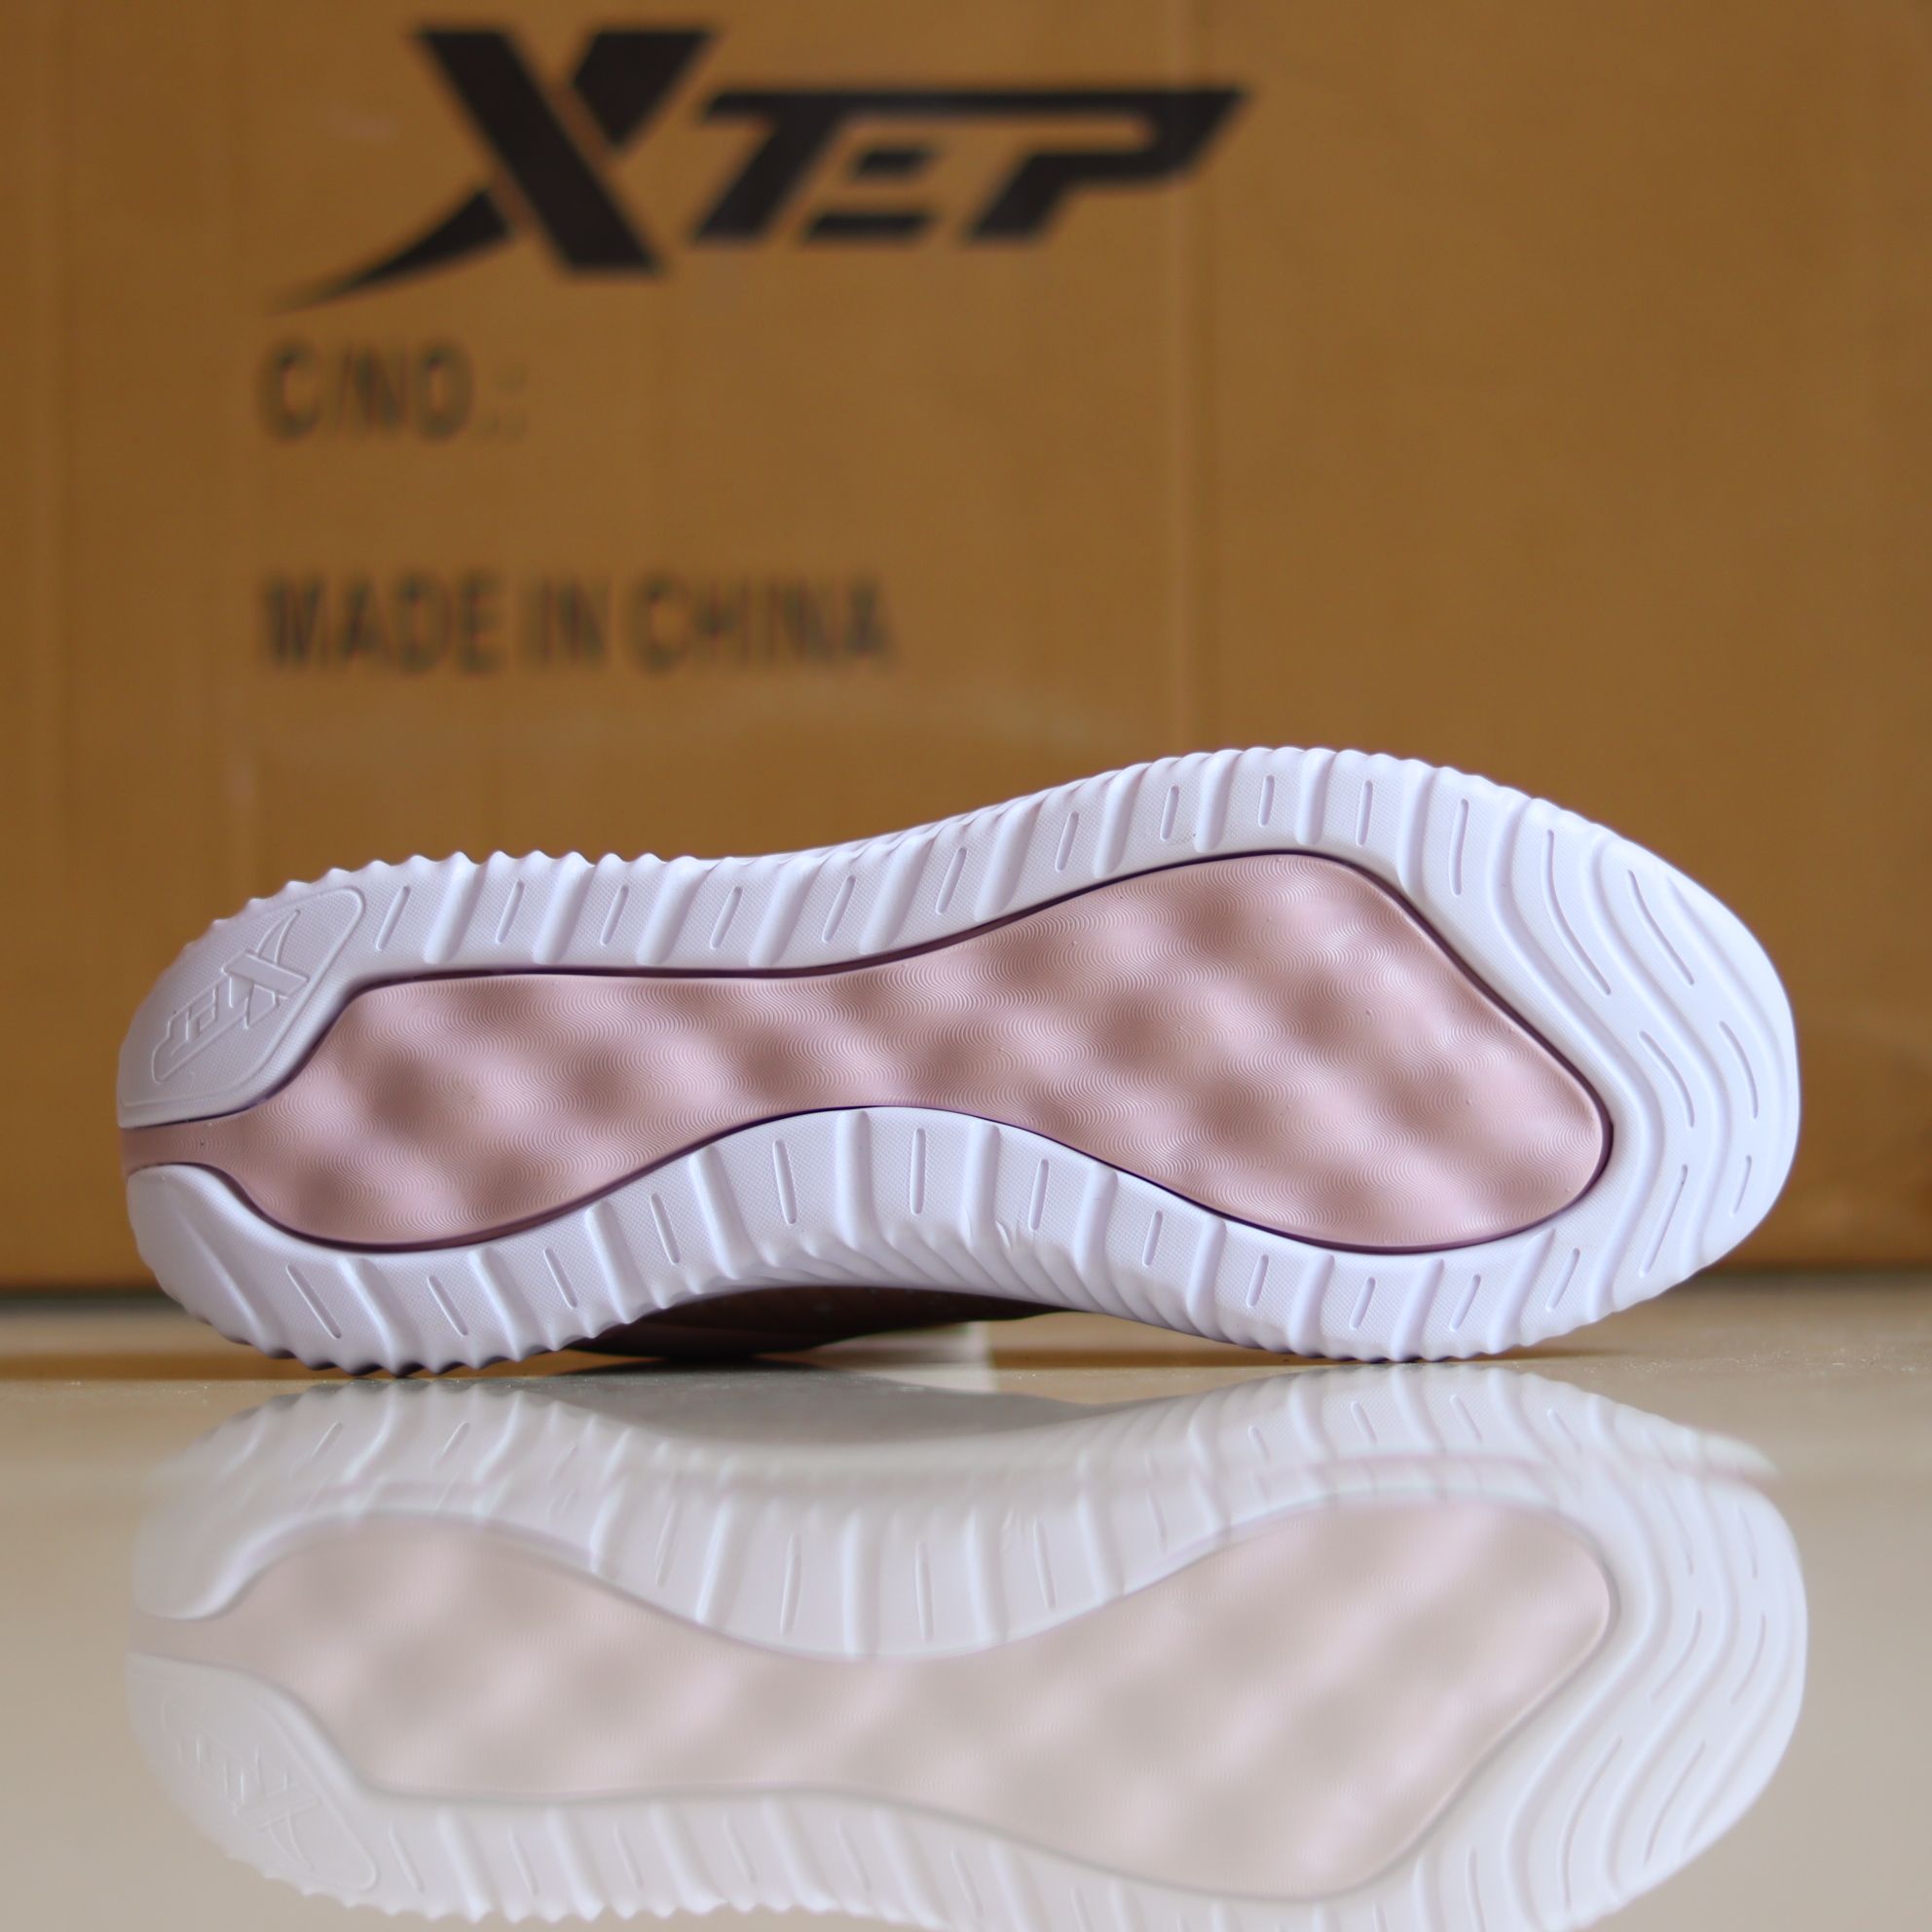 X54 - Women's Medicated Running Shoe by Xtep